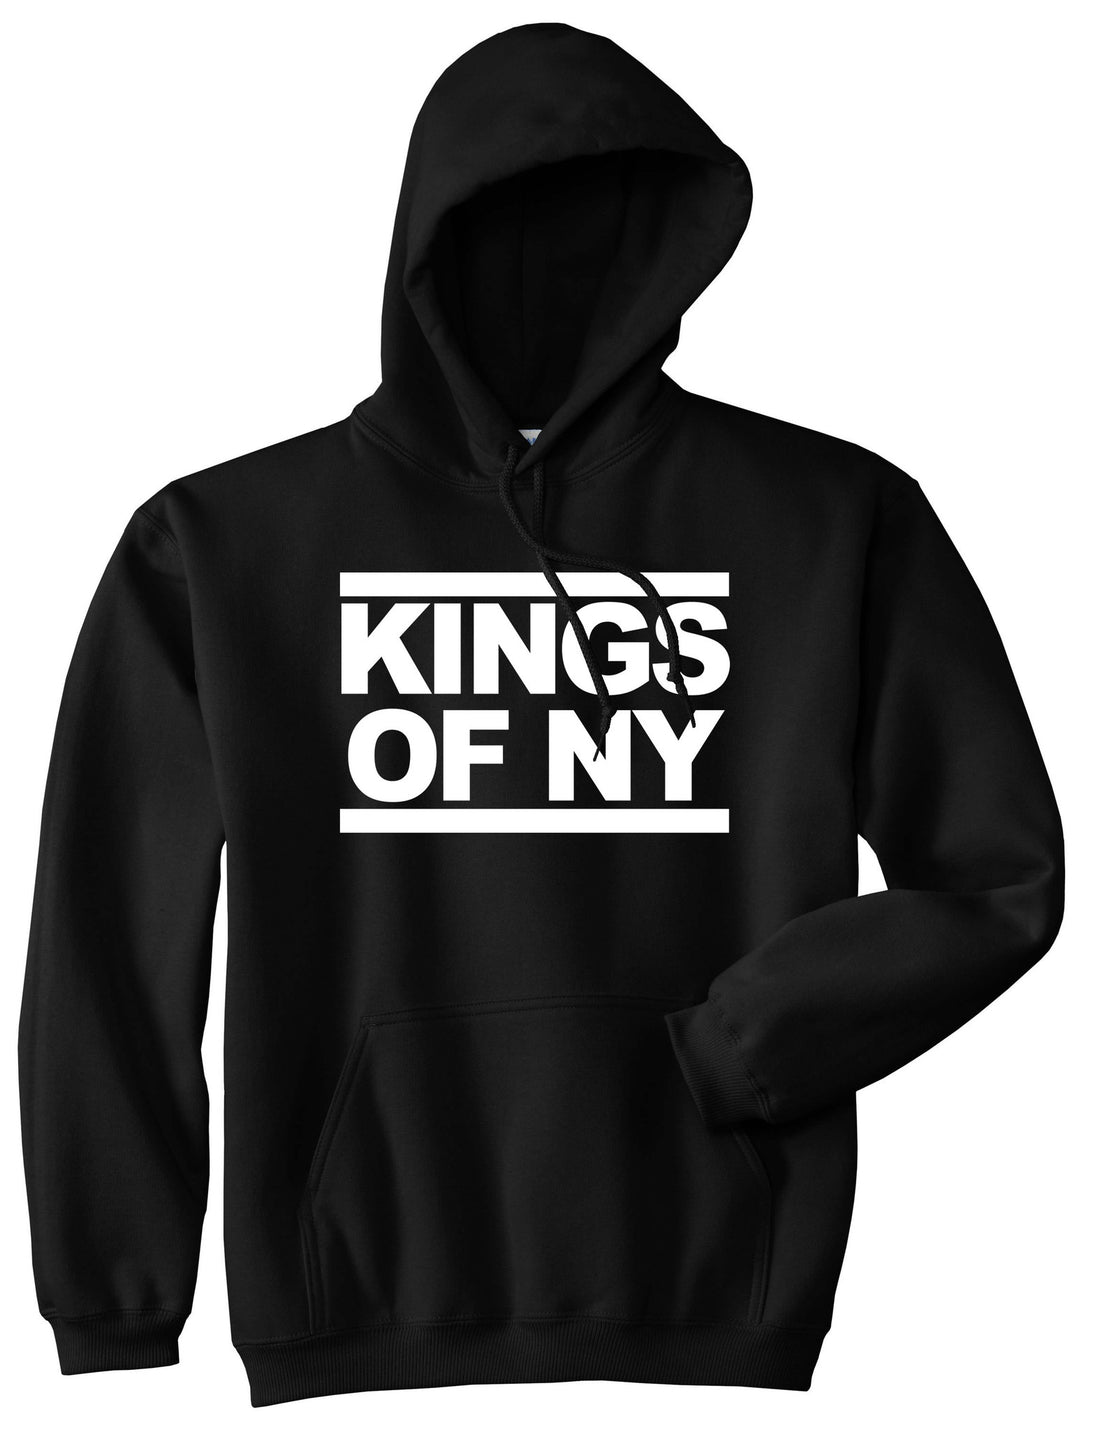 Kings Of NY Run DMC Logo Style Pullover Hoodie in Black By Kings Of NY